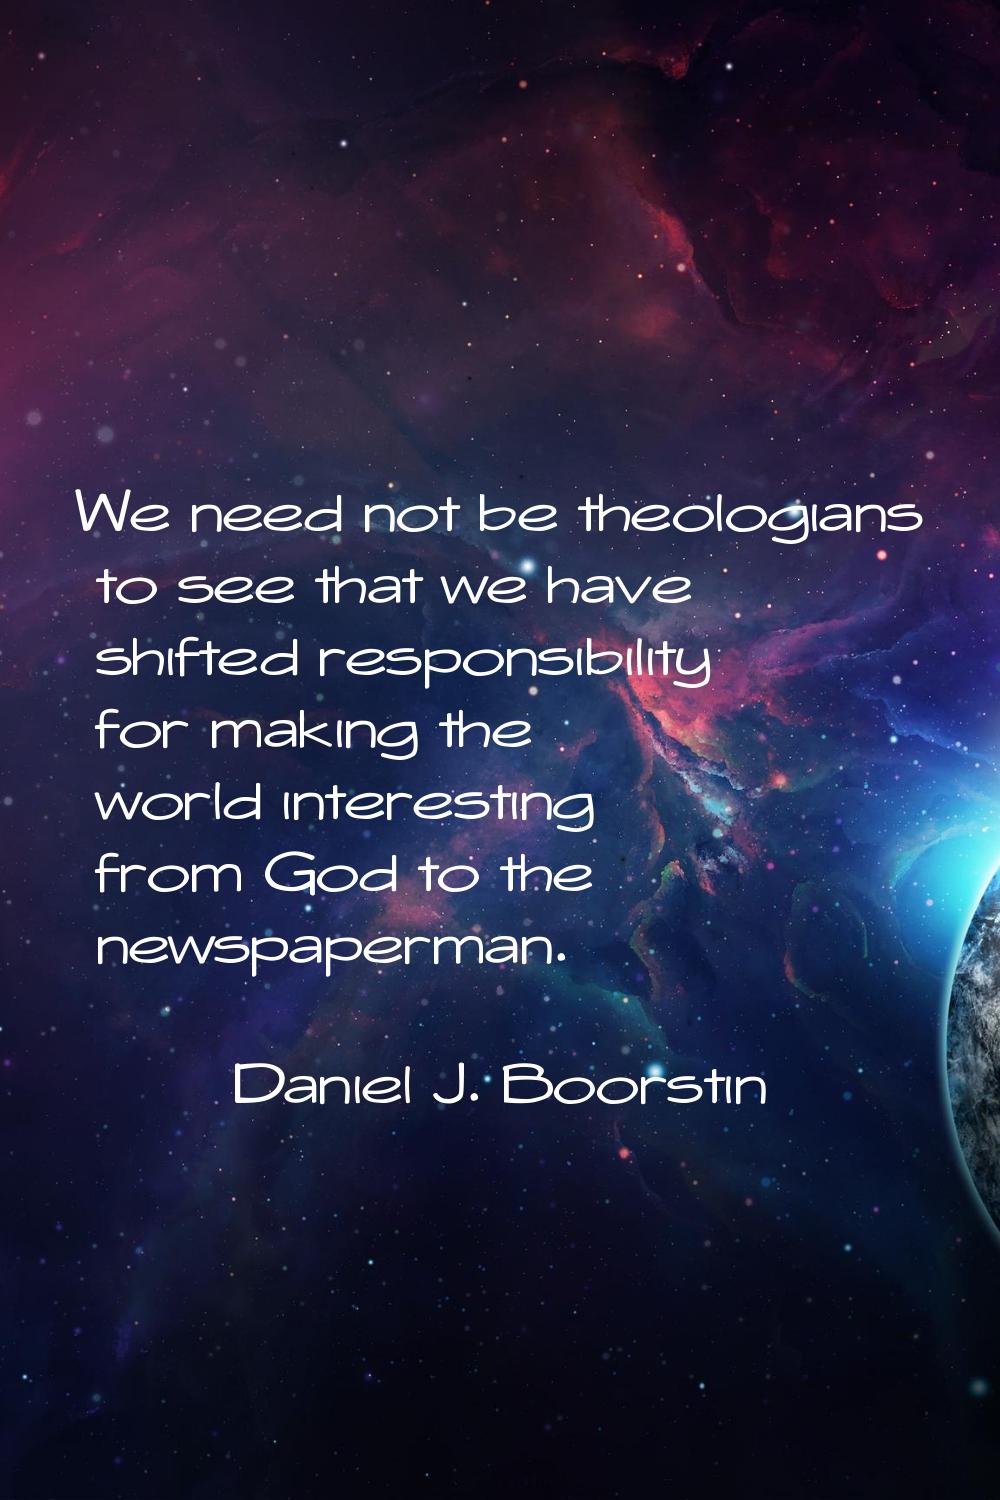 We need not be theologians to see that we have shifted responsibility for making the world interest